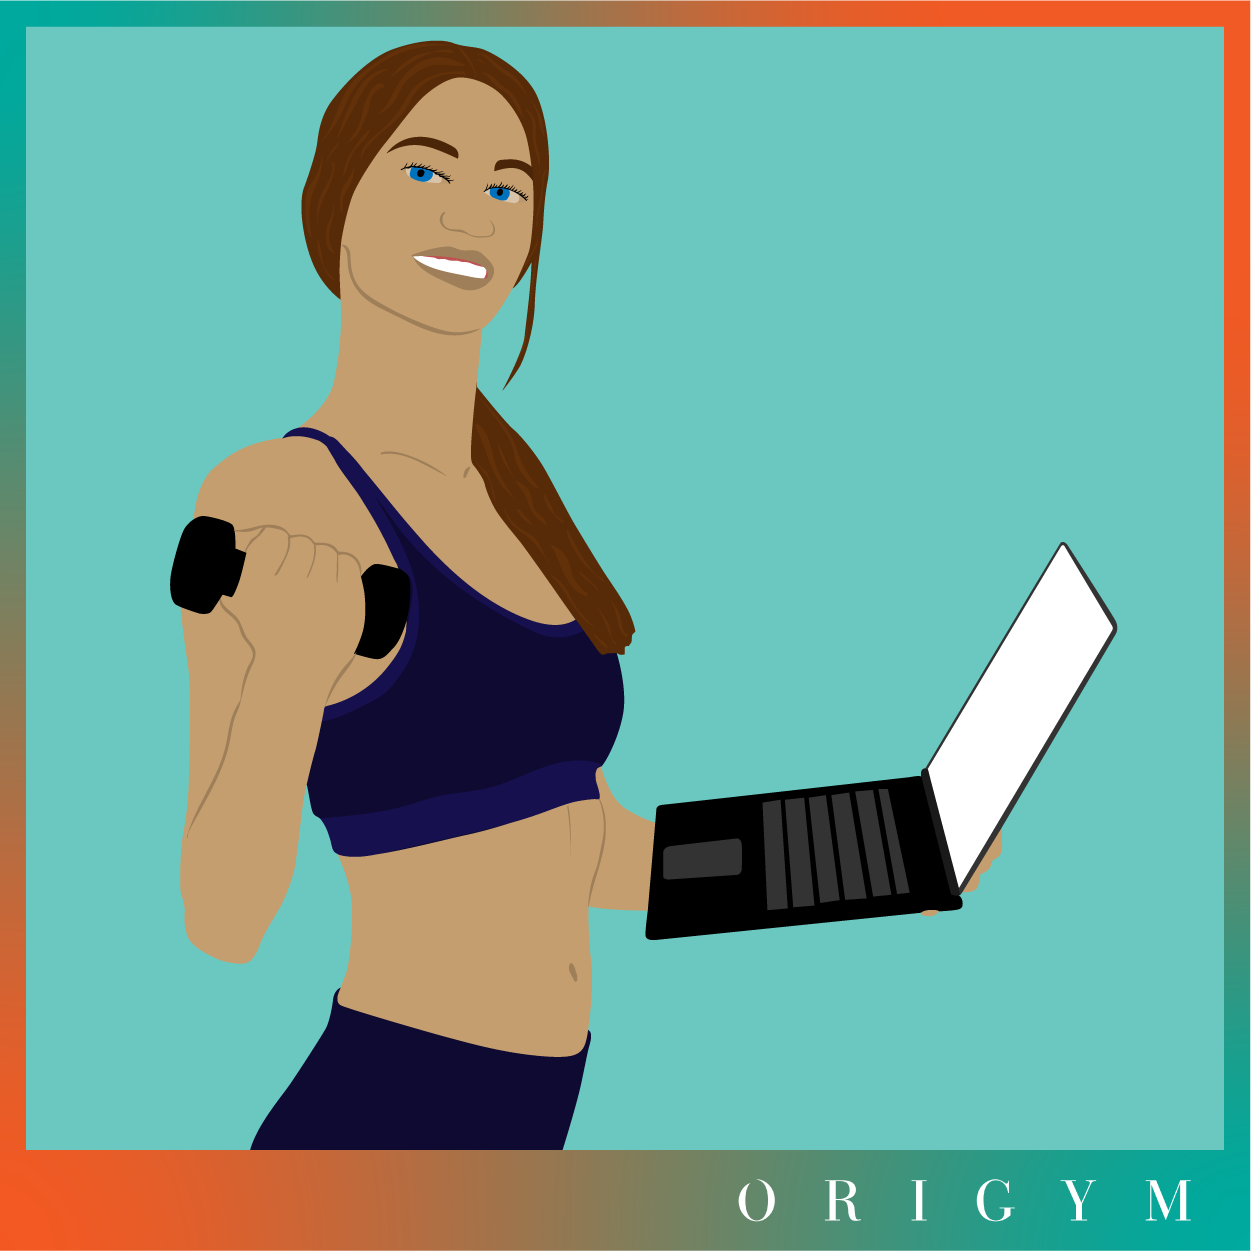 How to Get Hired as an Online Personal Trainer